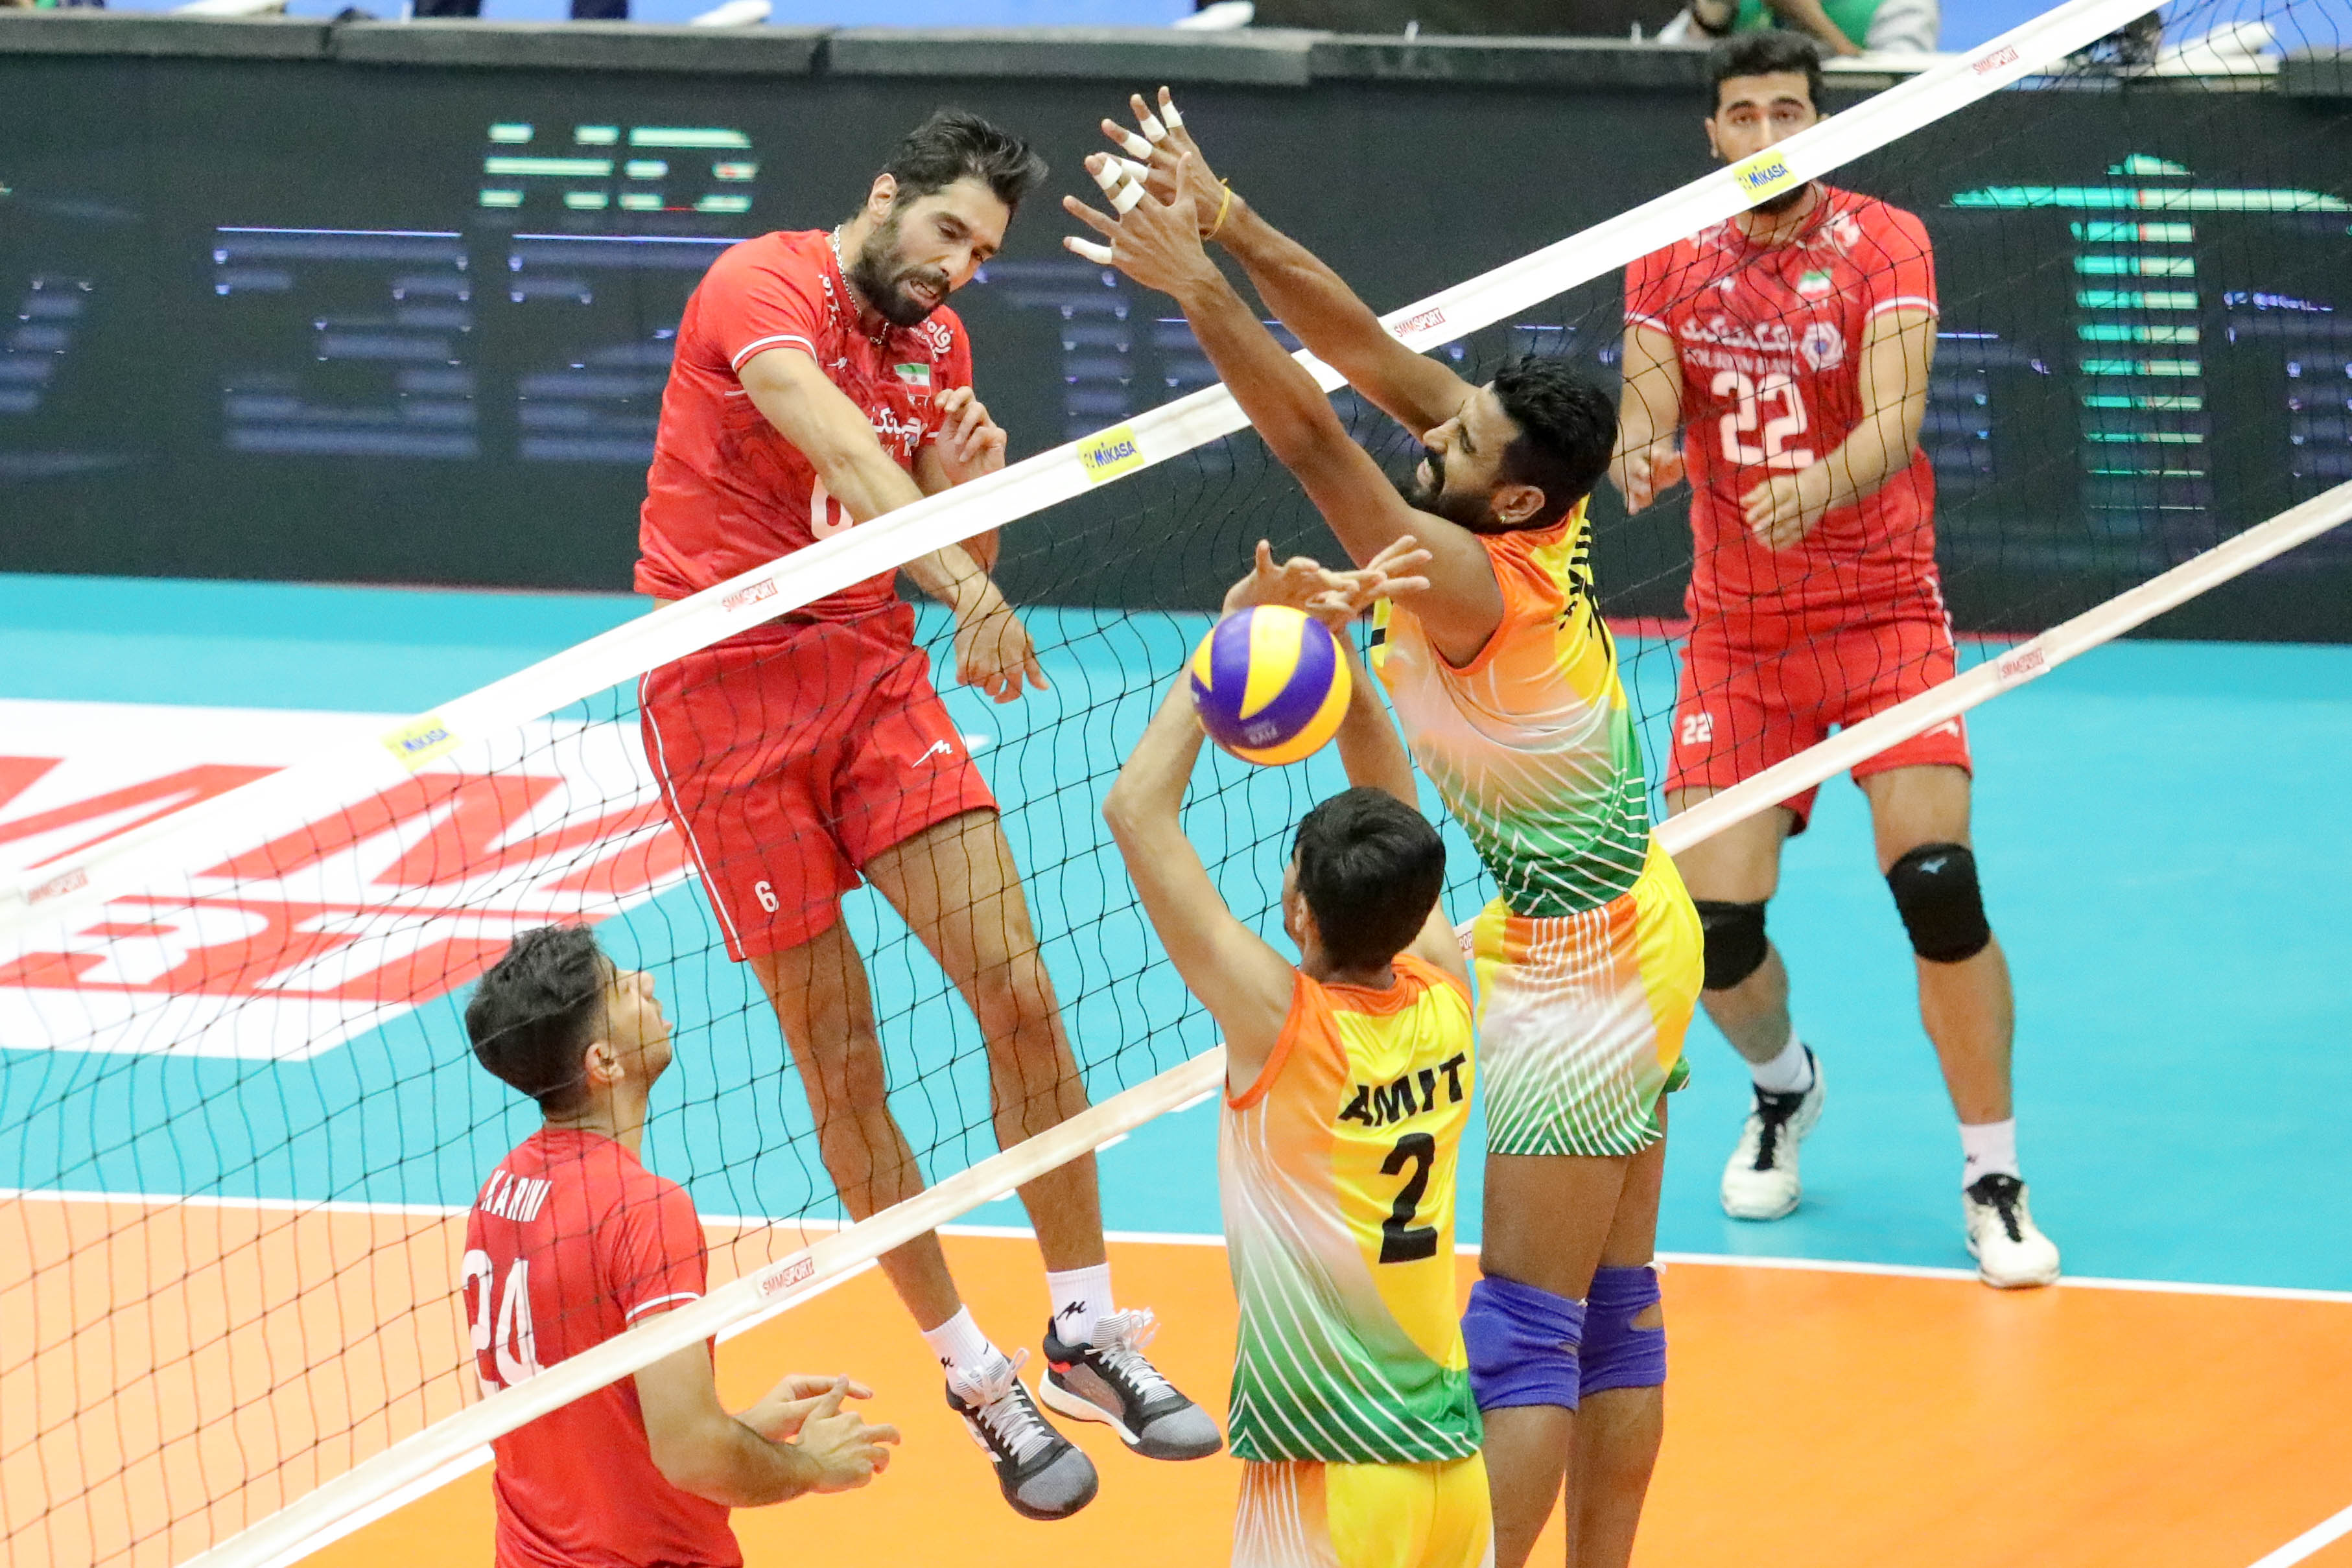 IRAN WIN TOP 8 PLAYOFF MATCH WITH 3-0 DEMOLITION OF INDIA